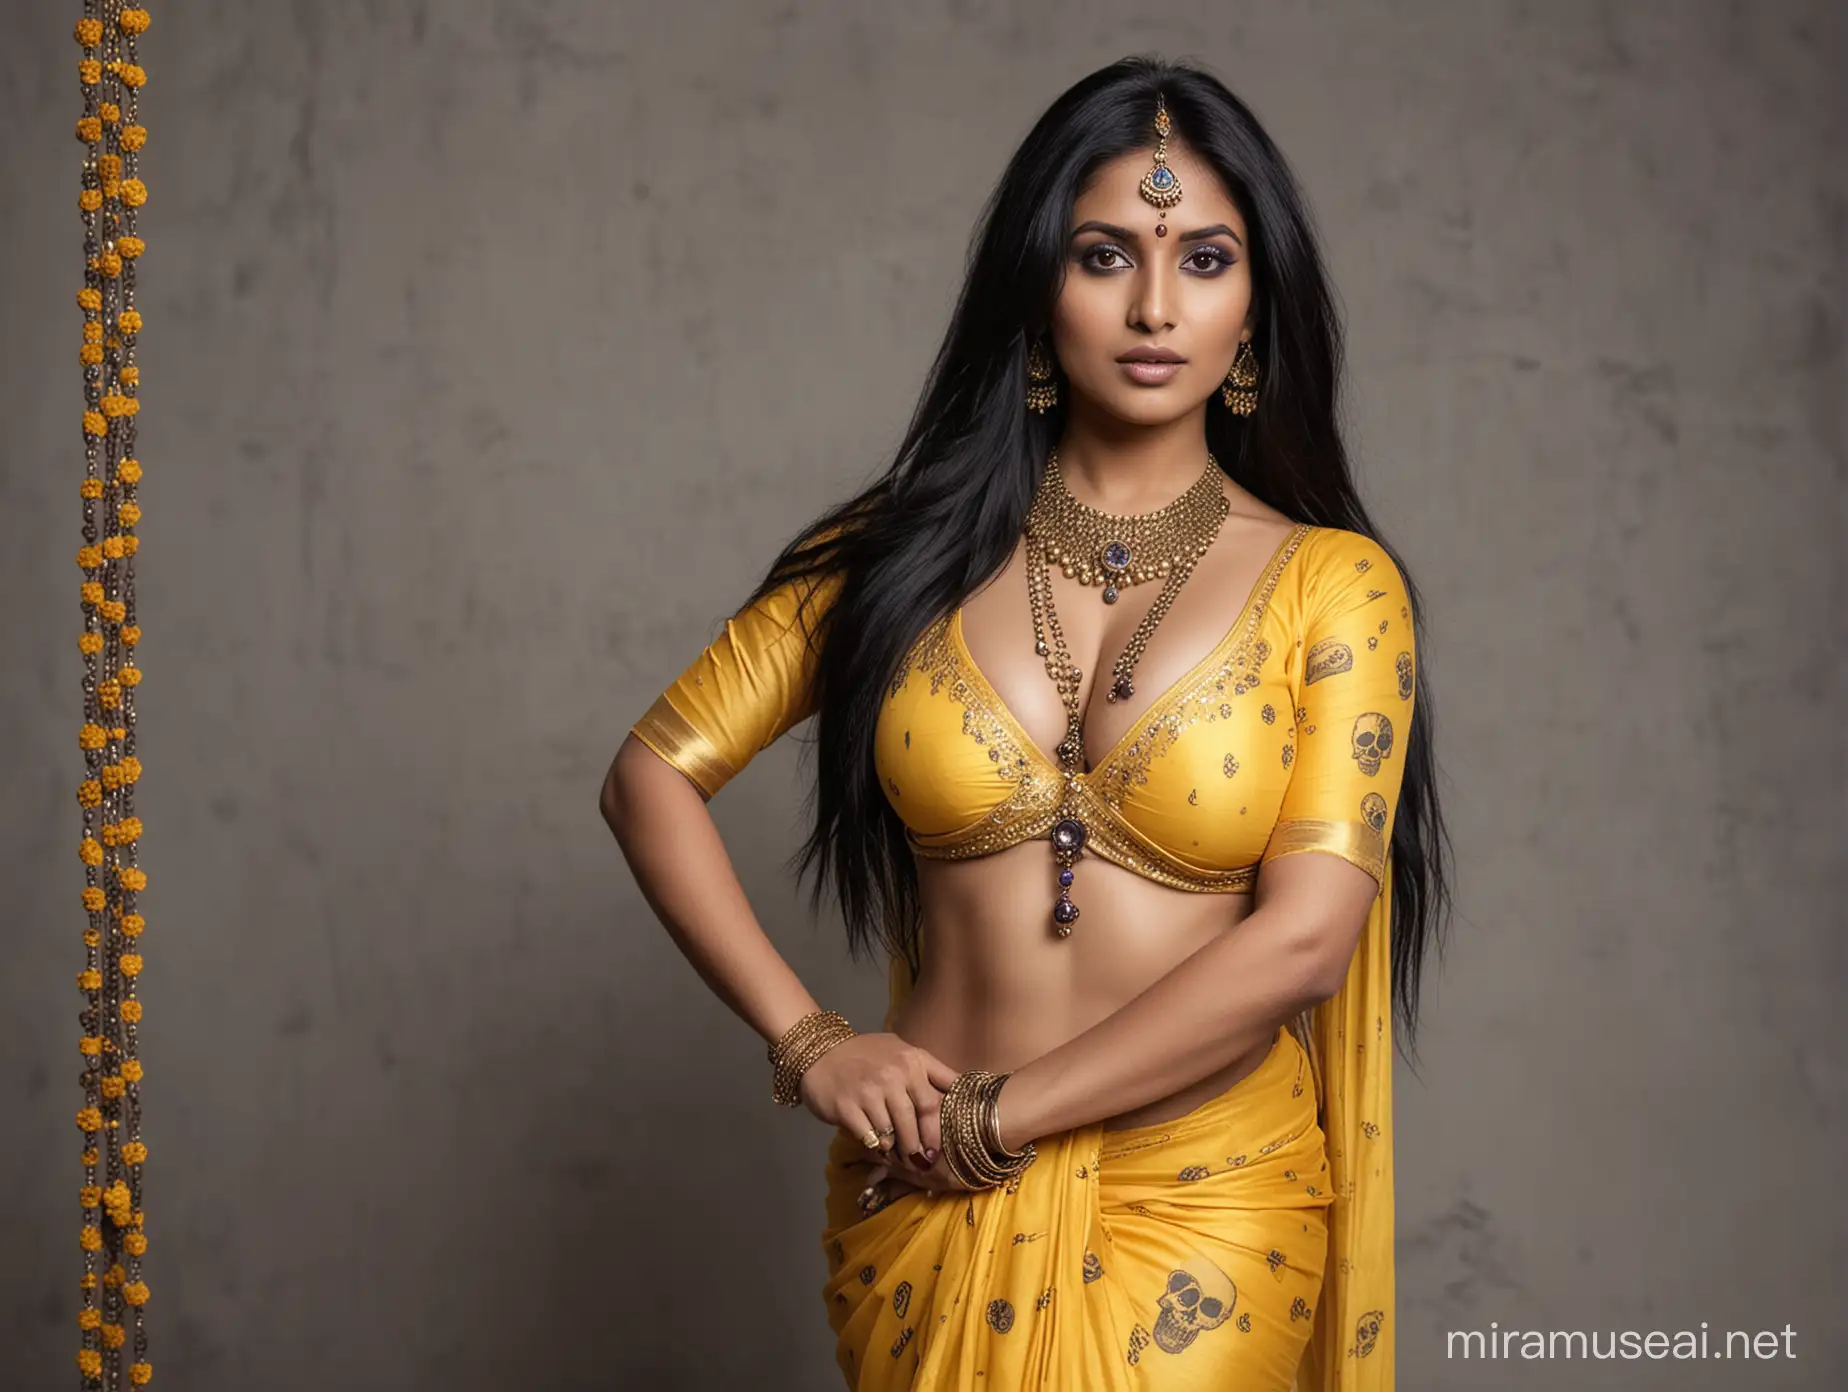 beautiful indian women, large breasts, three eyes, yellow sari with purple, long black hair. necklace  of skulls, full frontal view, seductive
